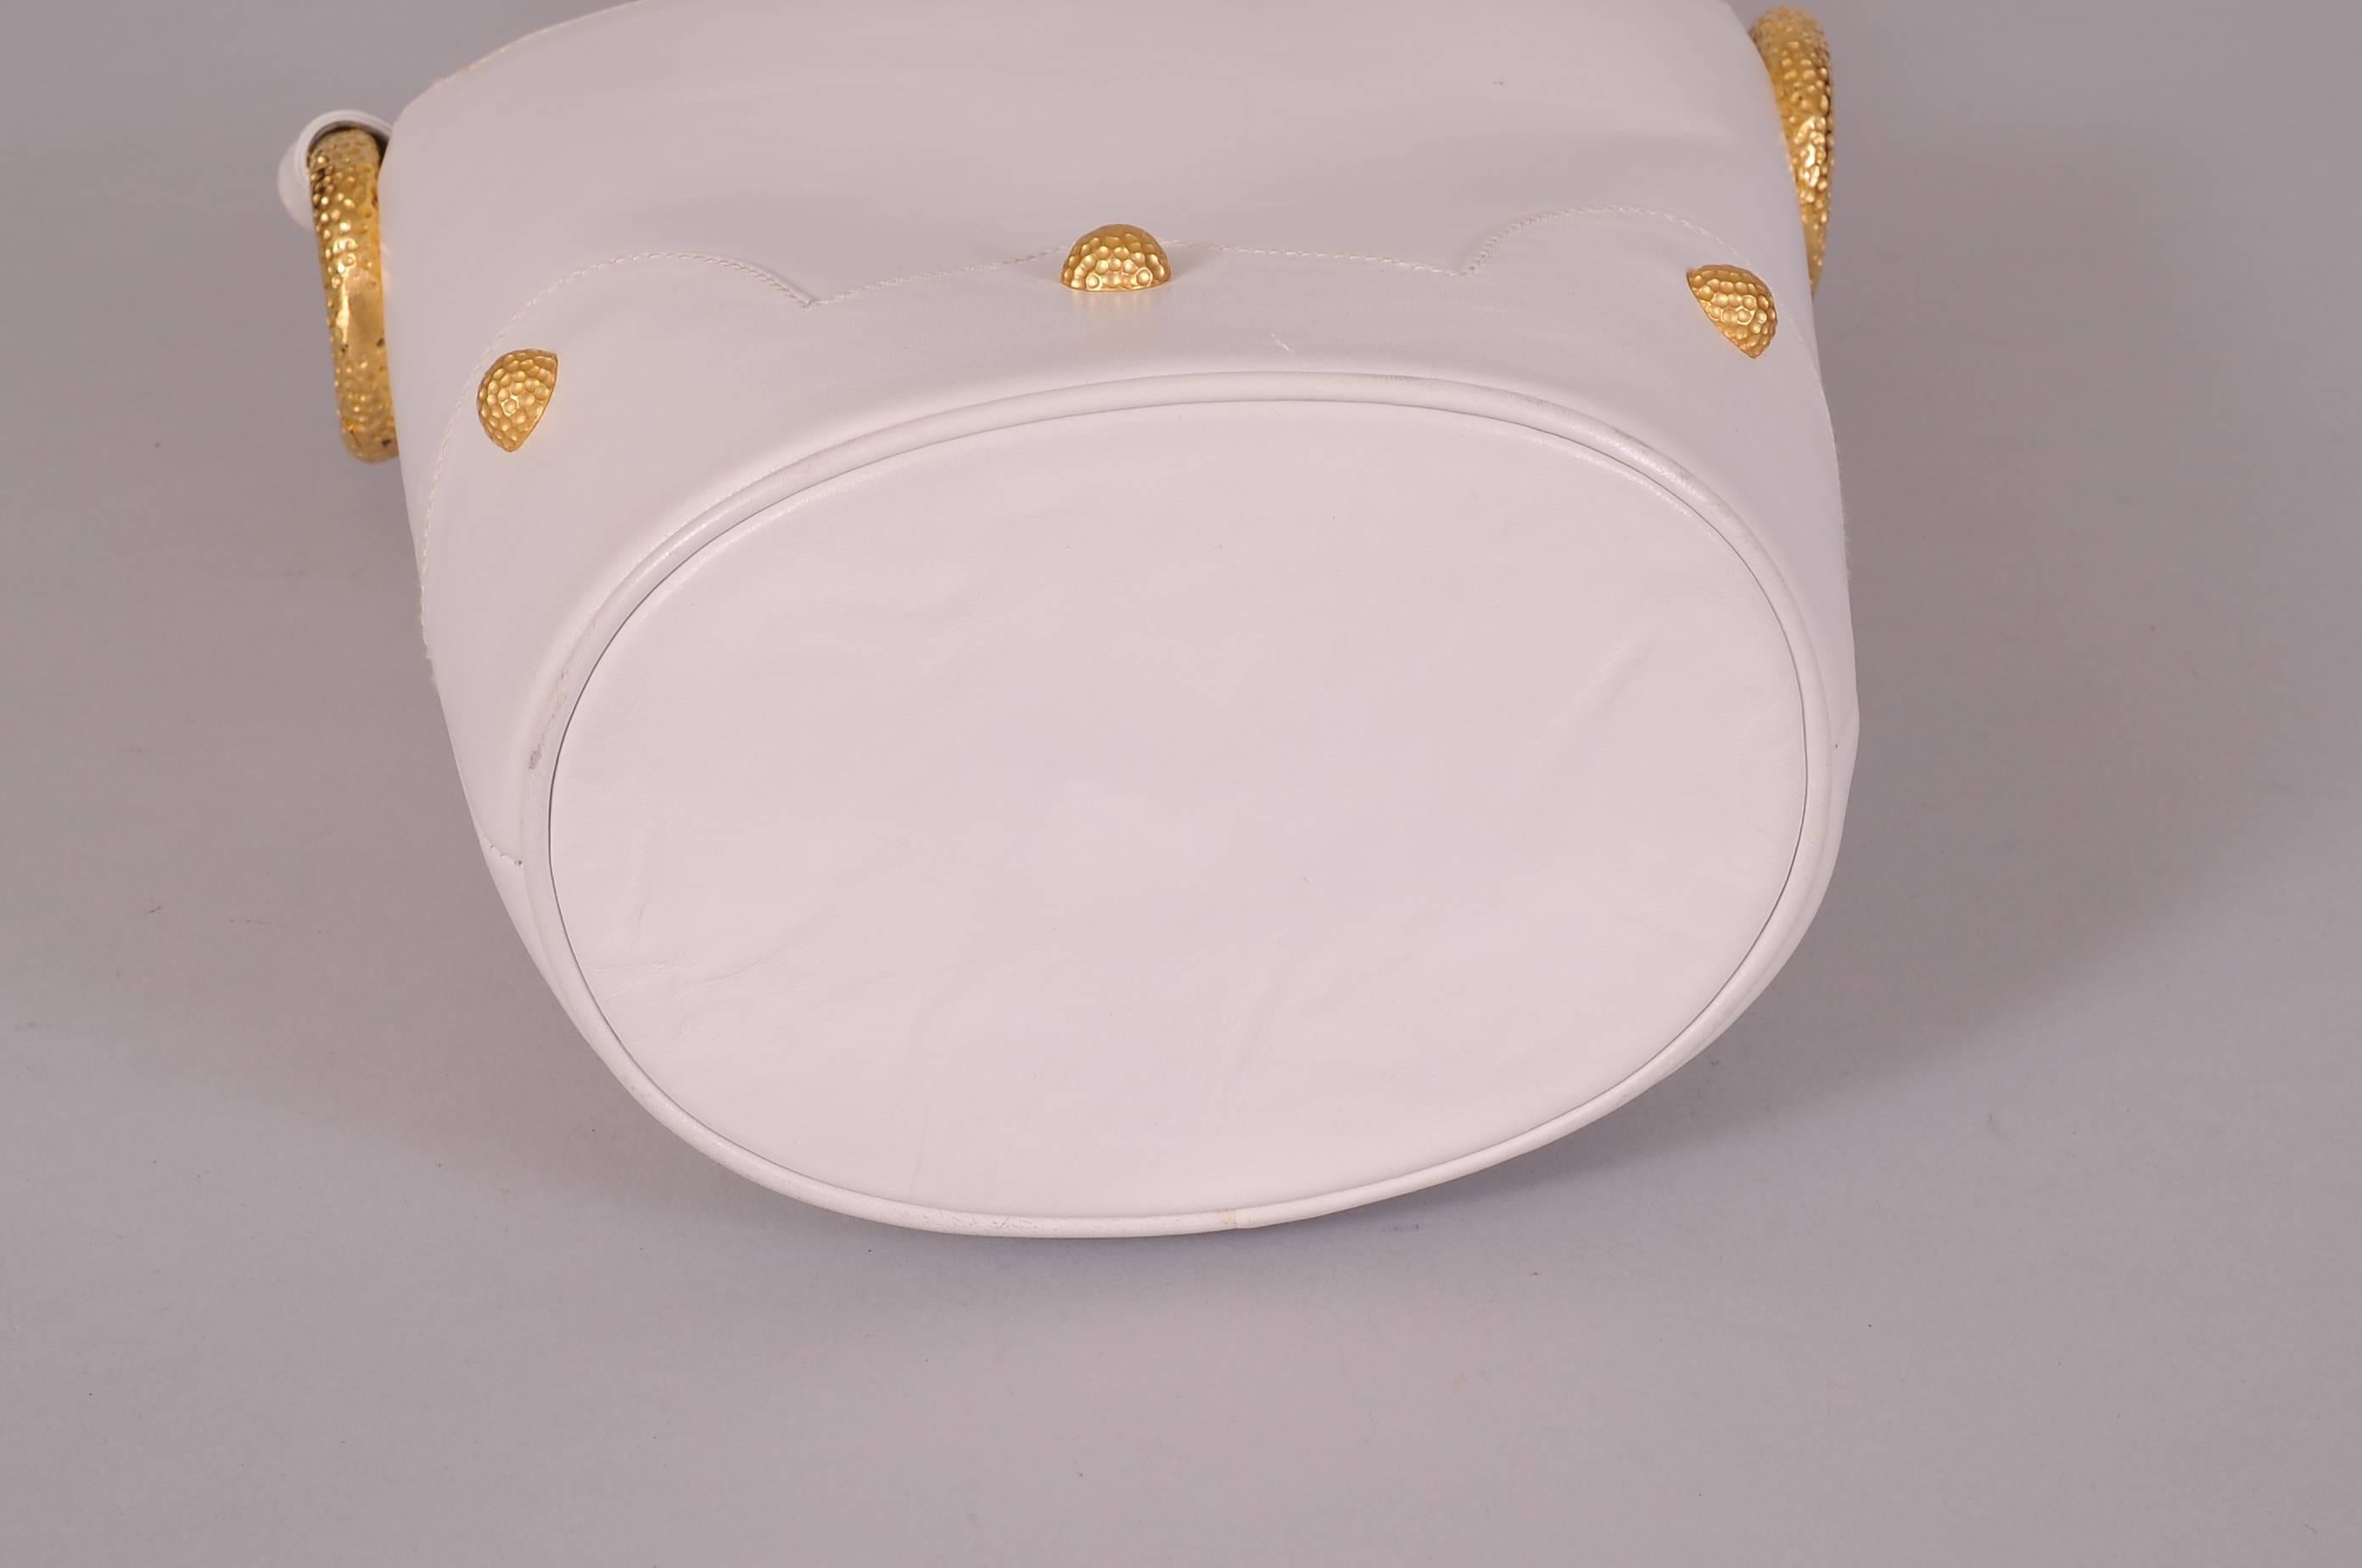 Women's Paloma Picasso White Leather Bag, Hammered Gold Decoration, Never Used